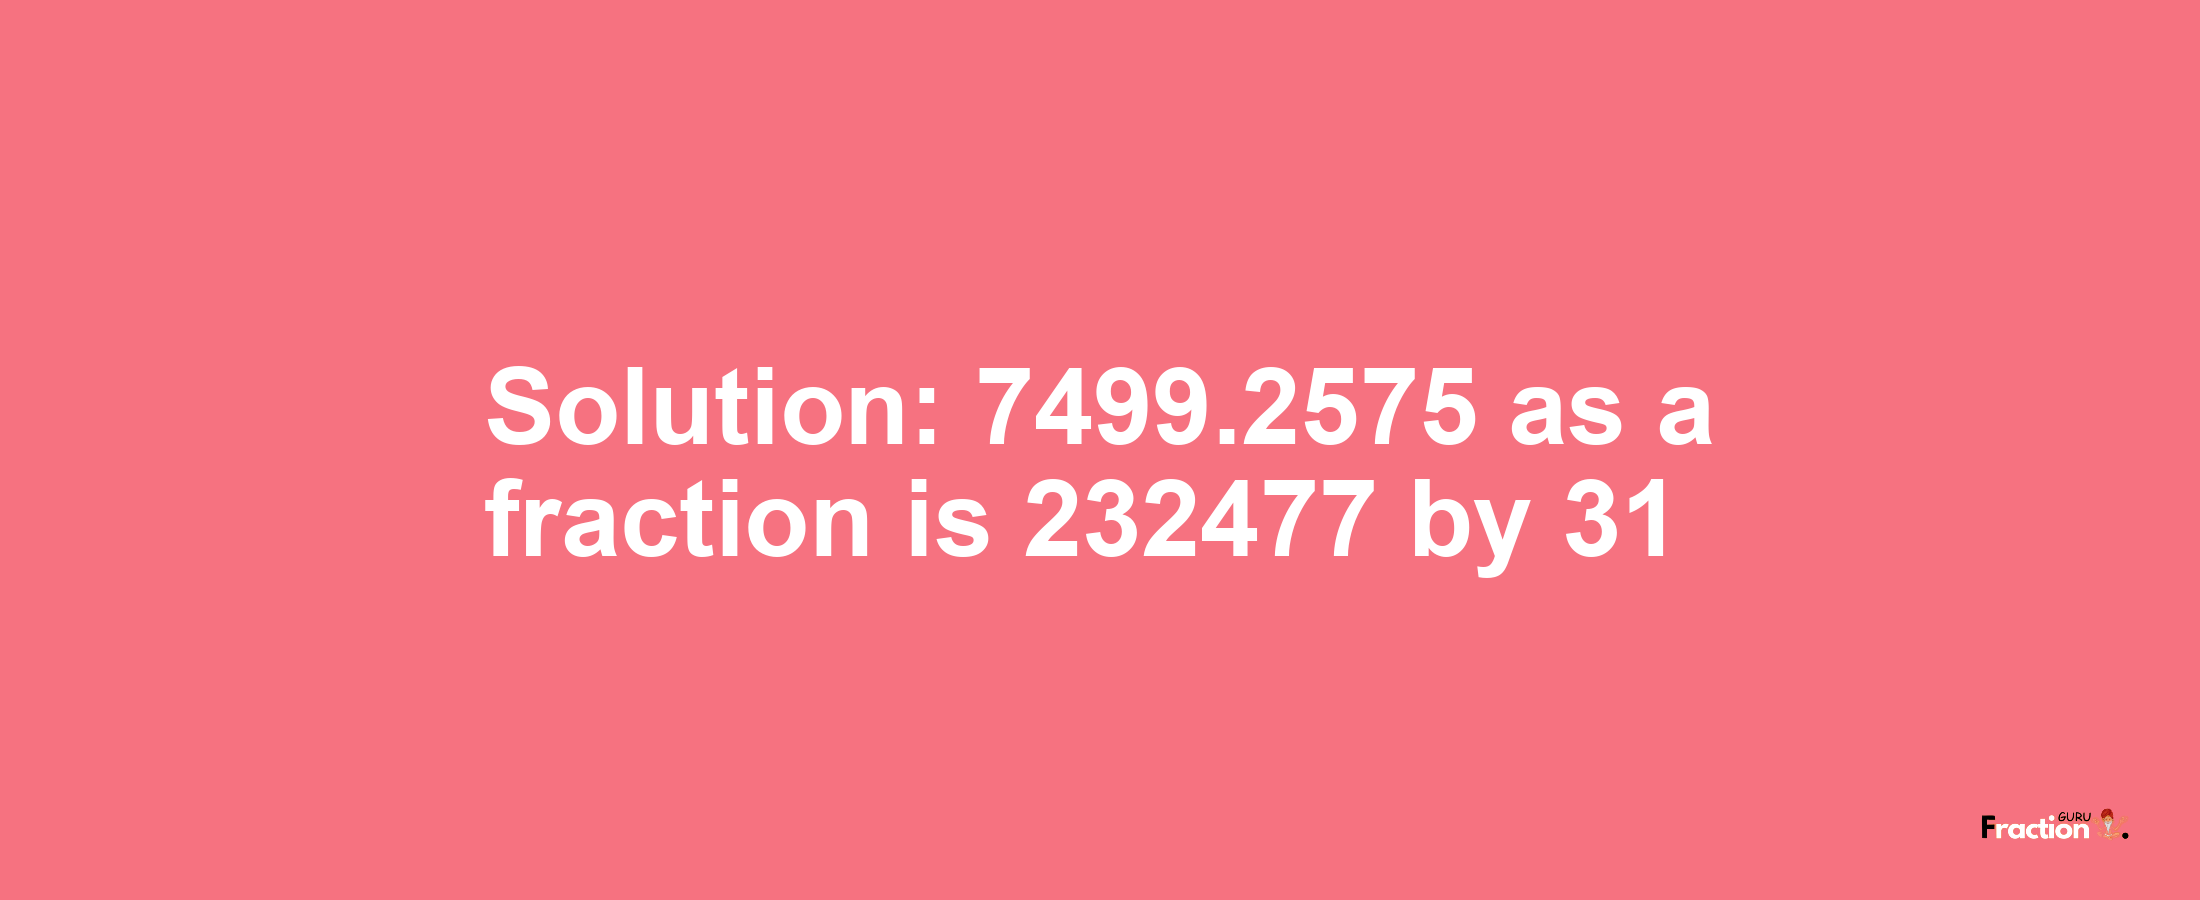 Solution:7499.2575 as a fraction is 232477/31